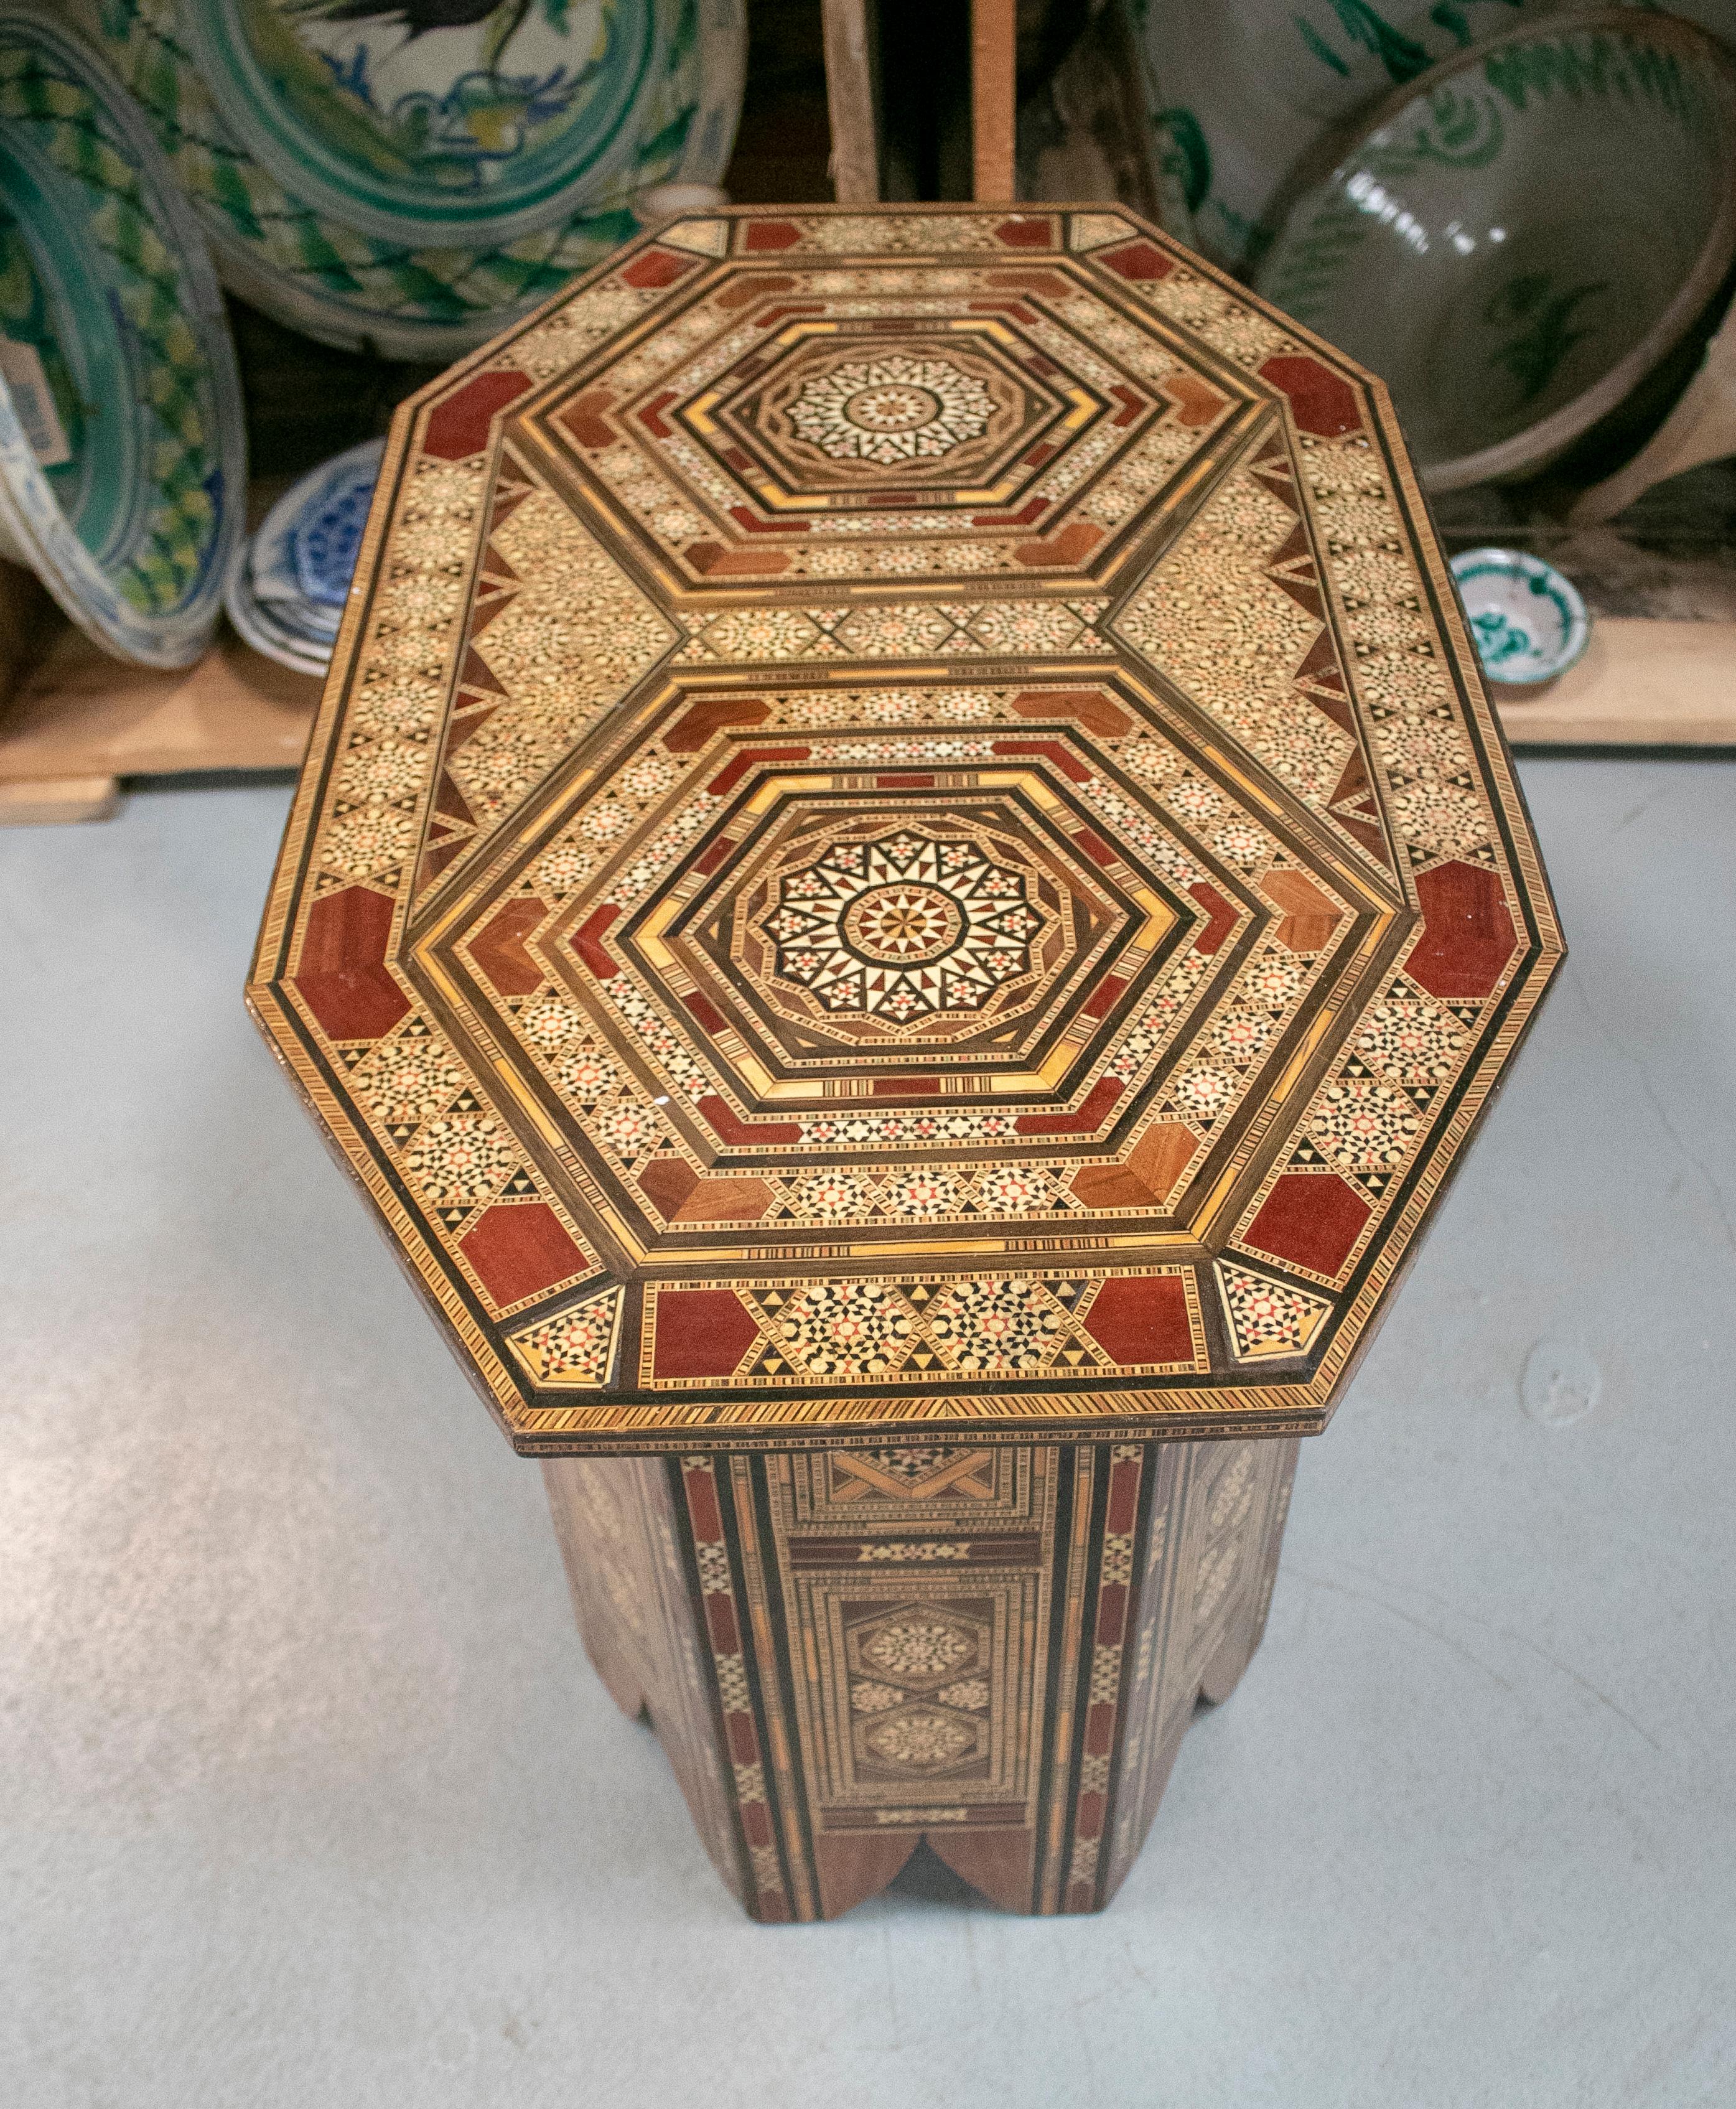 20th Century 1980s Moroccan Inlay Wooden Table with Ornamental Geometric Decorations